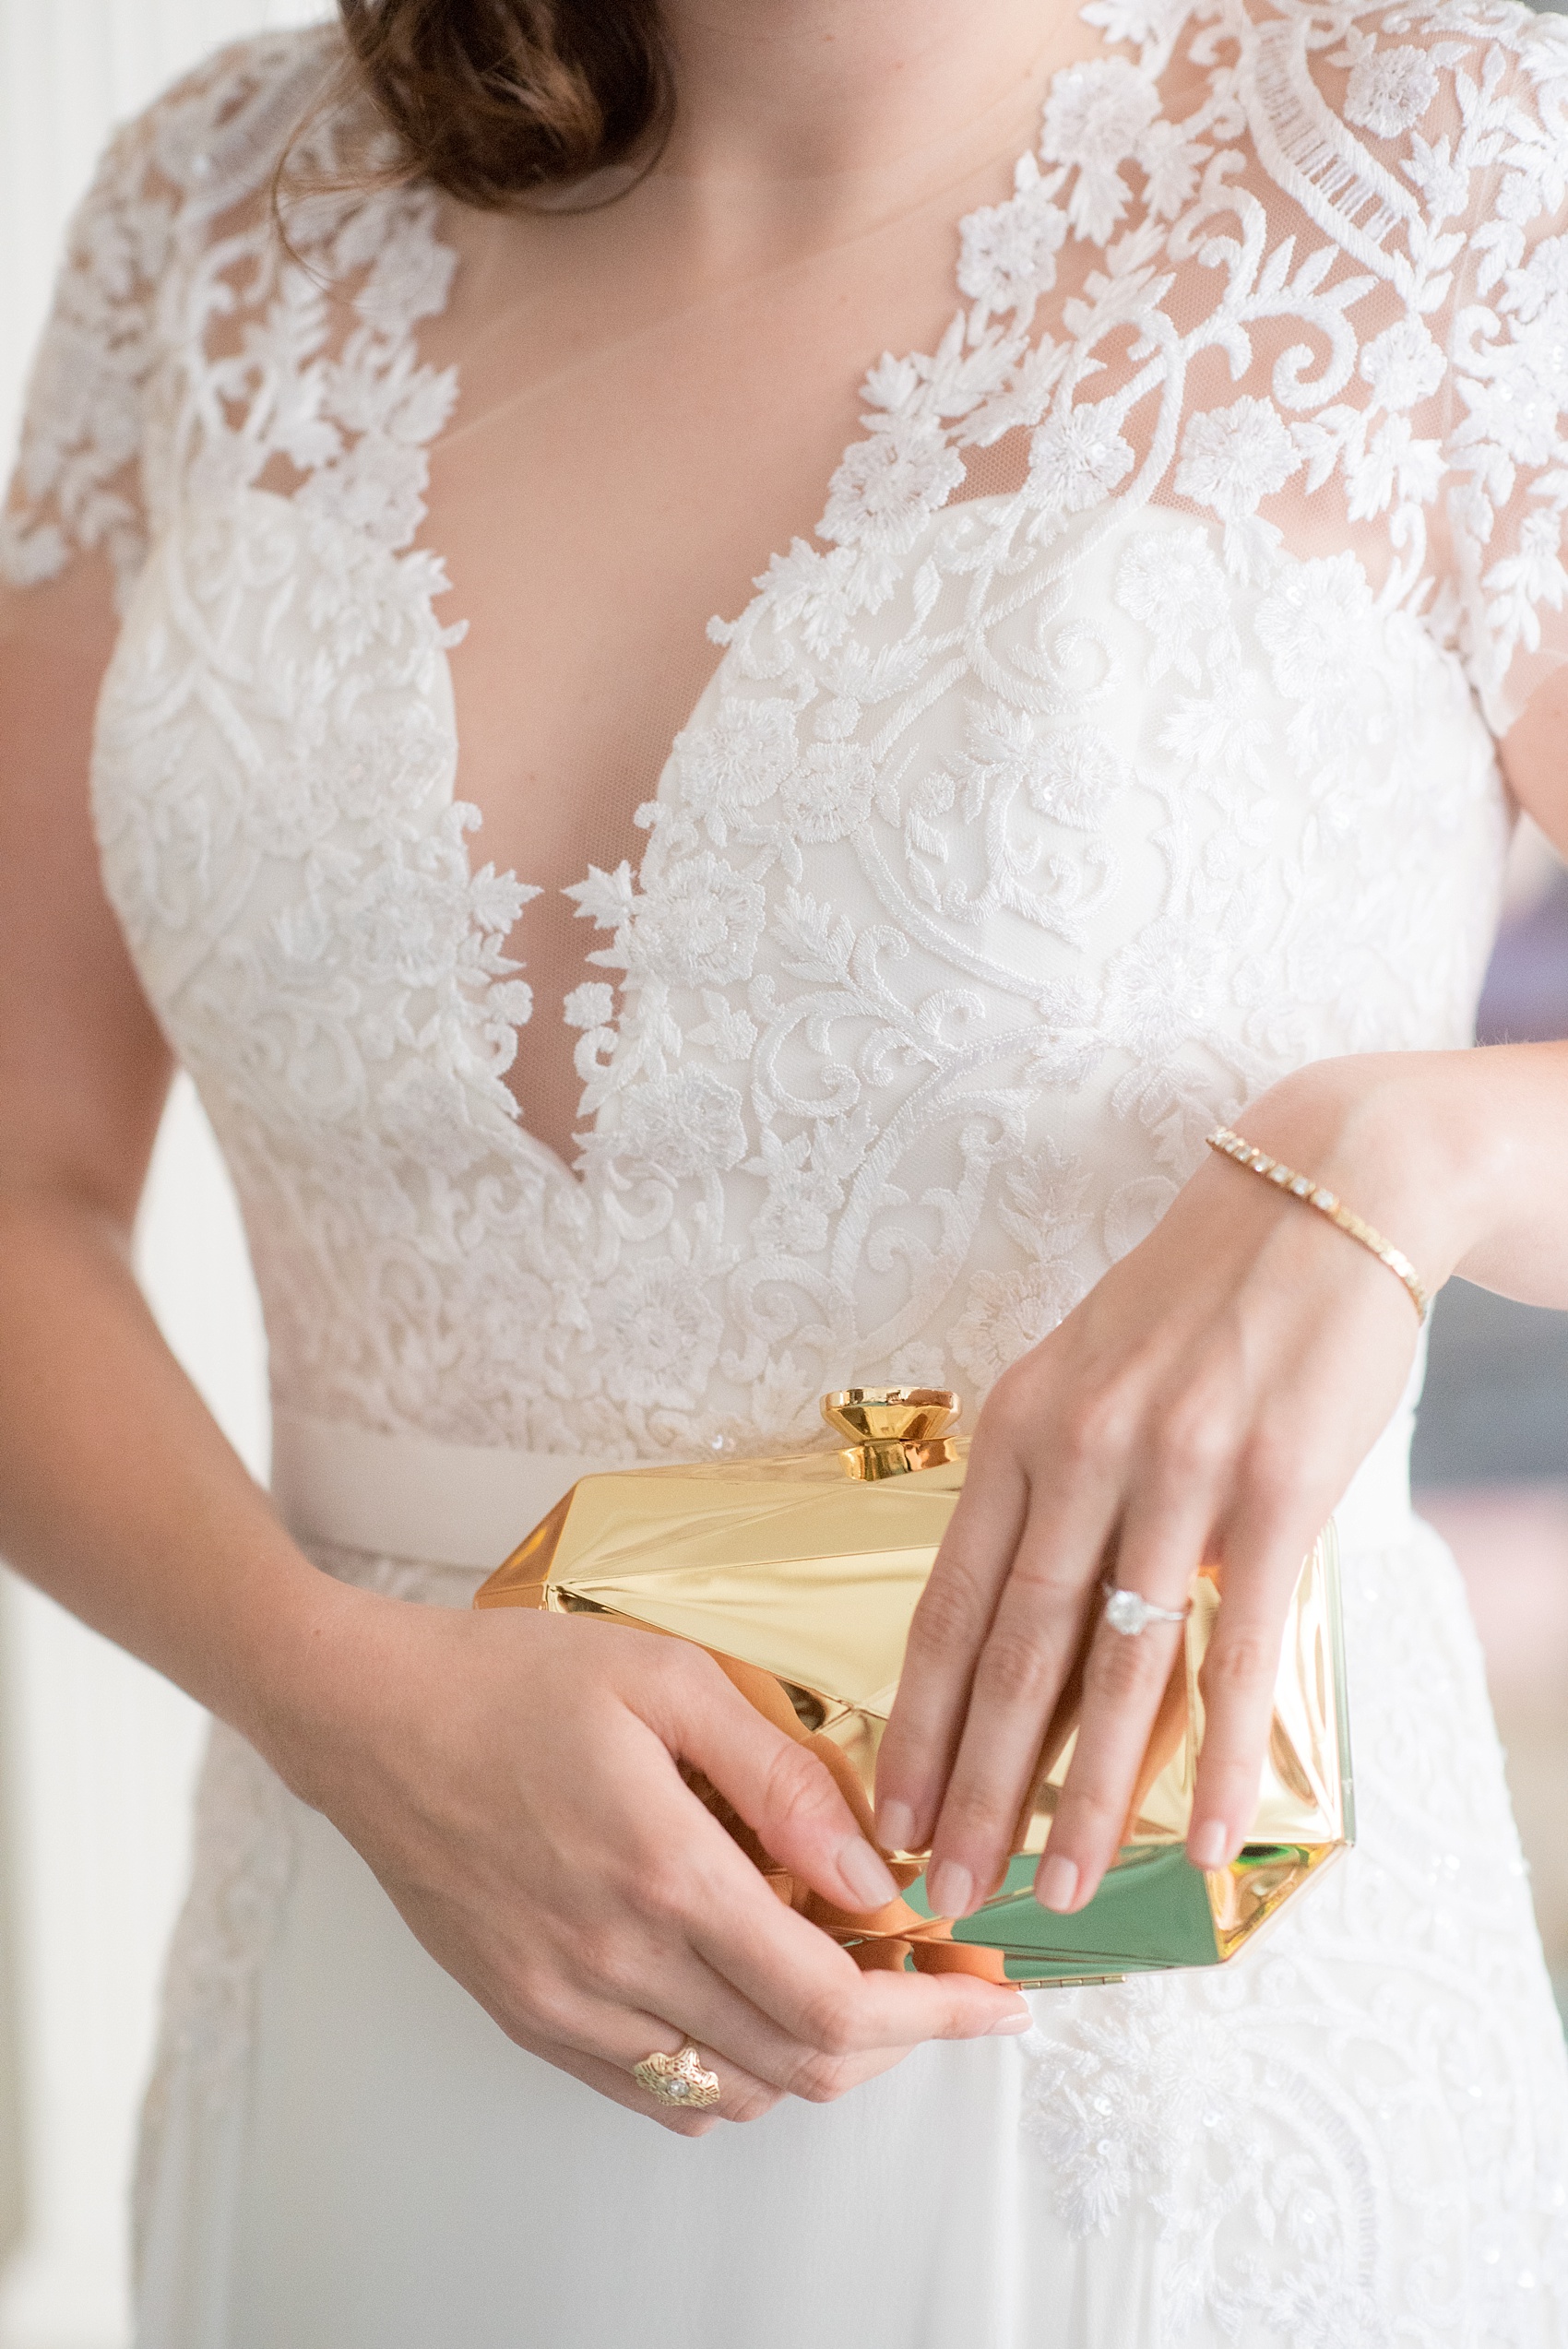 Mikkel Paige Photography photos of a wedding at Prospect Park Boathouse in Brooklyn, NY. A candid picture of the bride's gold metal clutch and Reem Acra lace gown.